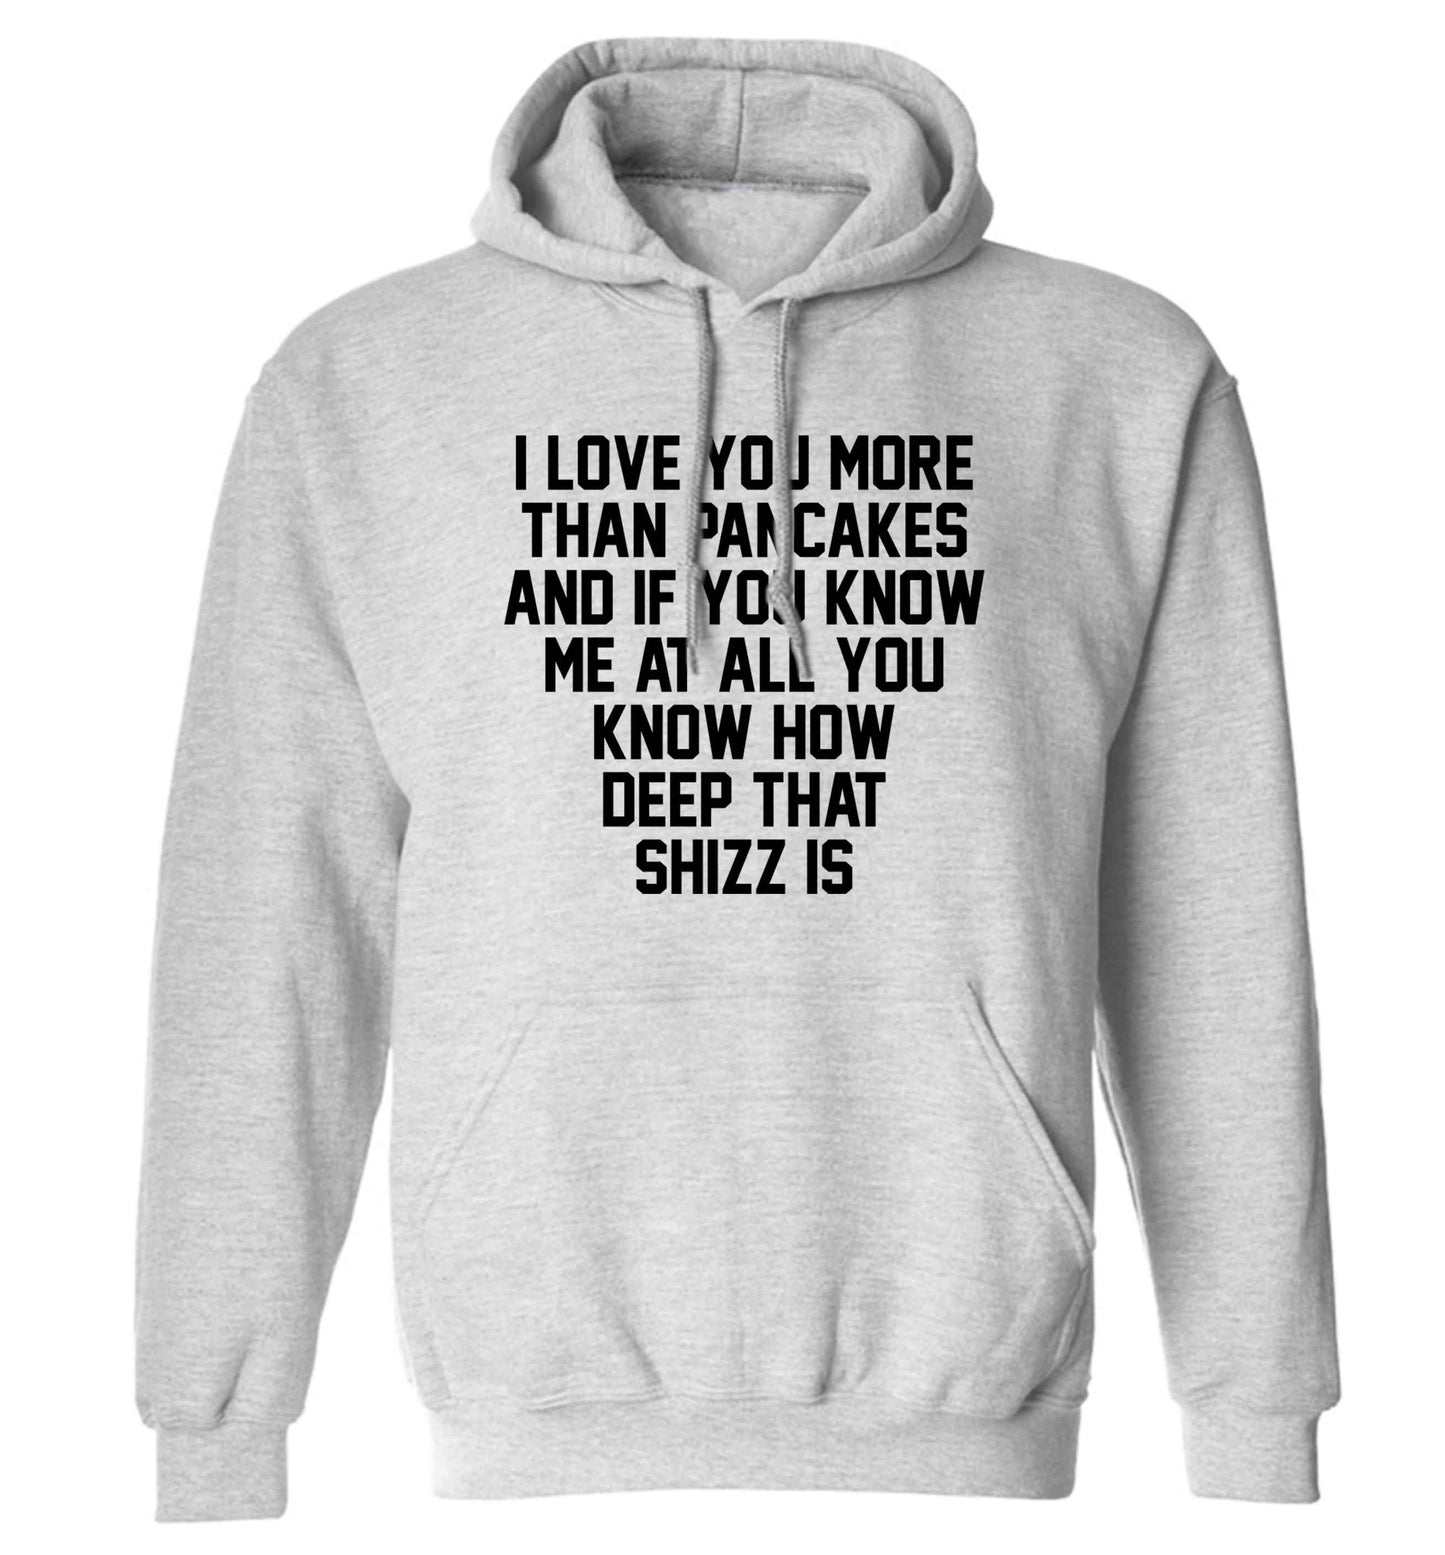 I love you more than pancakes and if you know me at all you know how deep that shizz is adults unisex grey hoodie 2XL